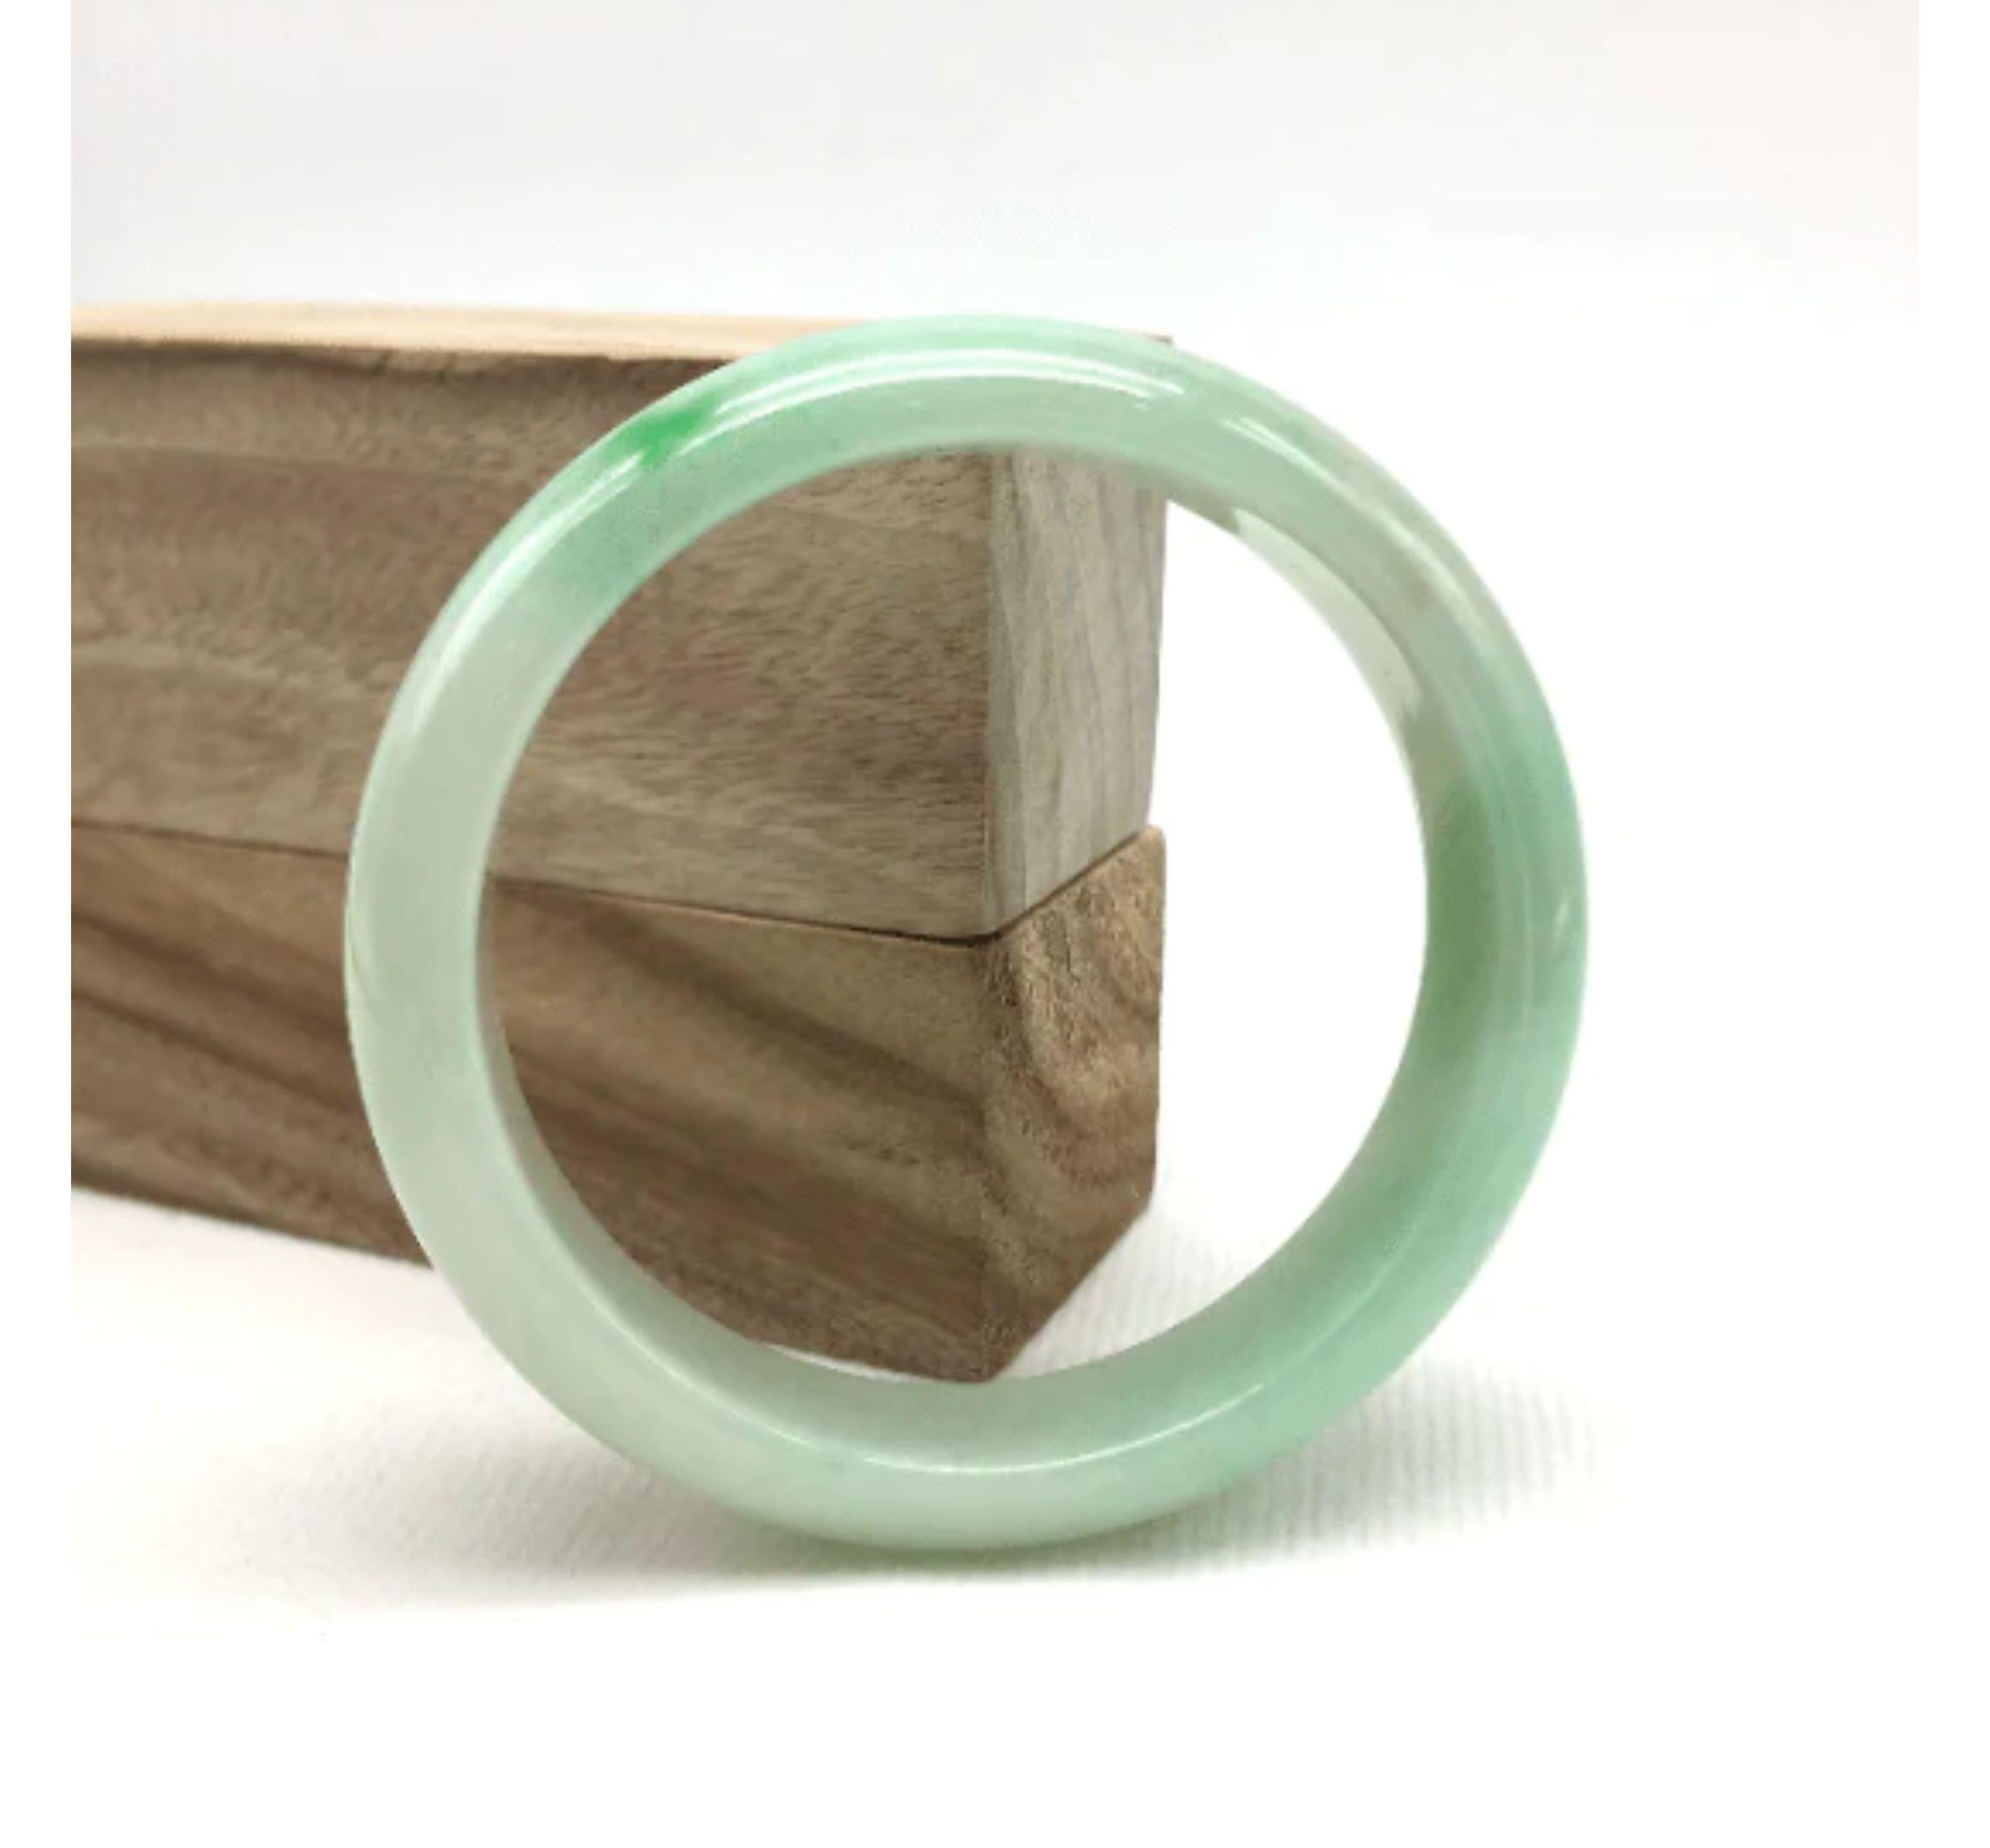 * DETAILS--- This bangle is made with very high-quality smooth jadeite jade, a beautiful green, and lavender color all throughout, and beautiful patterns of green as seen in the pictures. The texture is very smooth and even throughout the bangle,